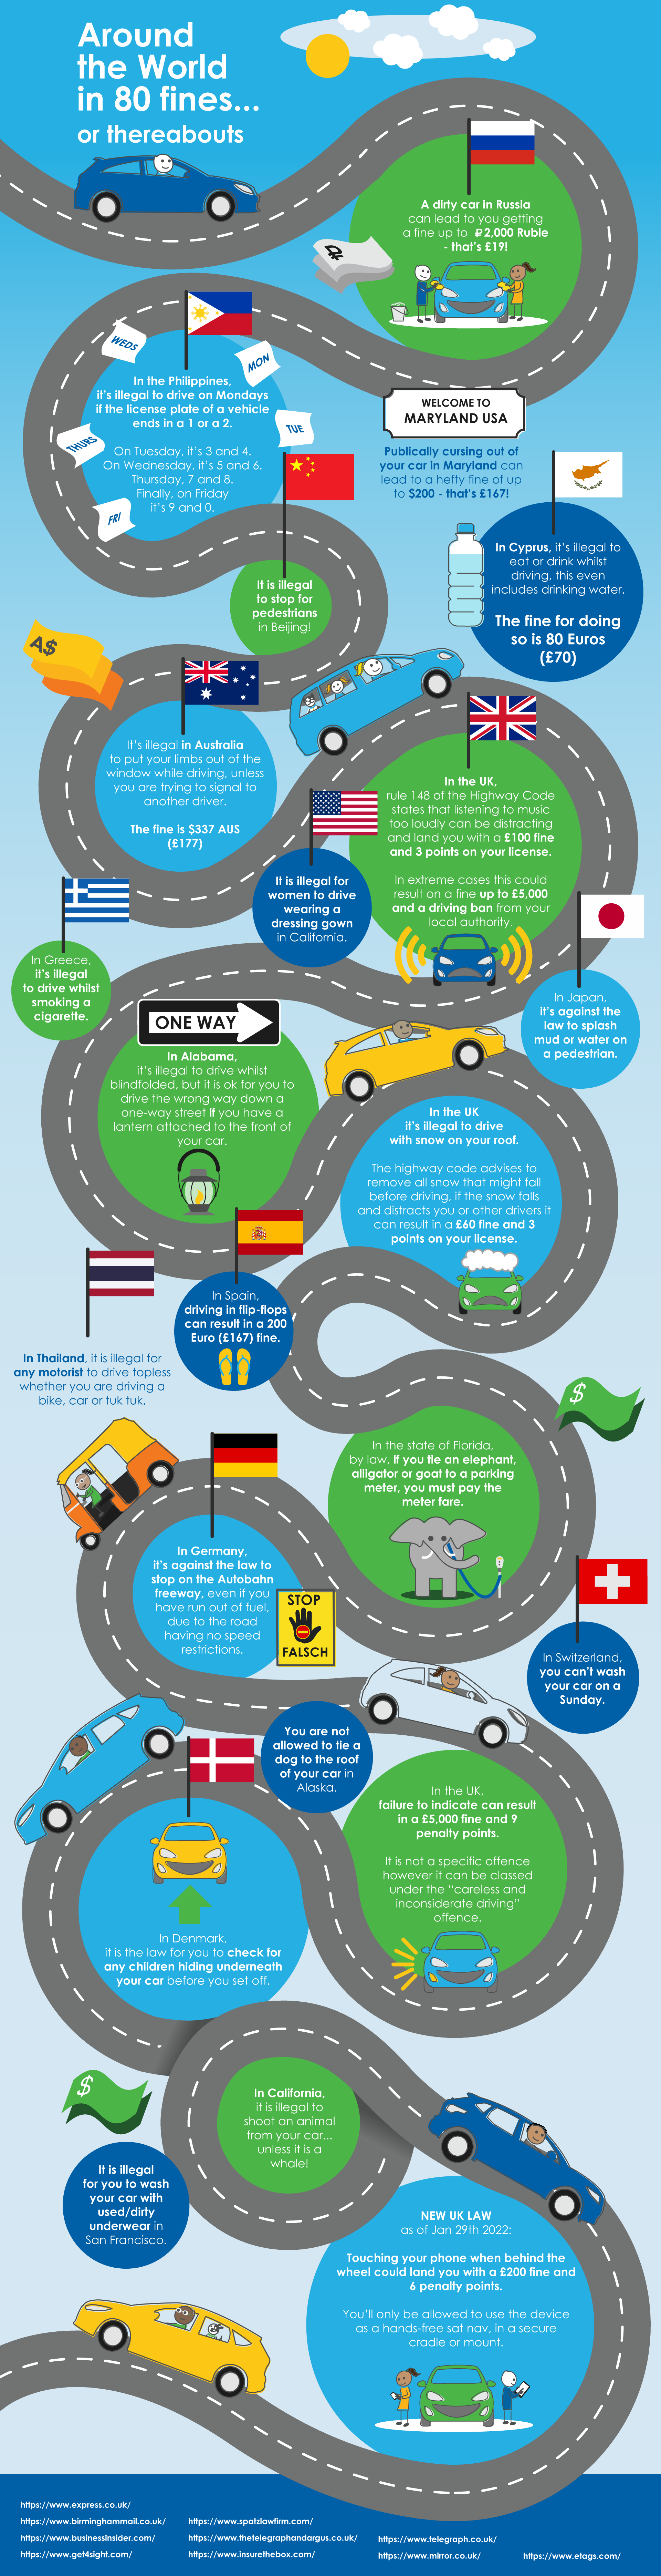 driving-laws-around-the-world-go-car-credit